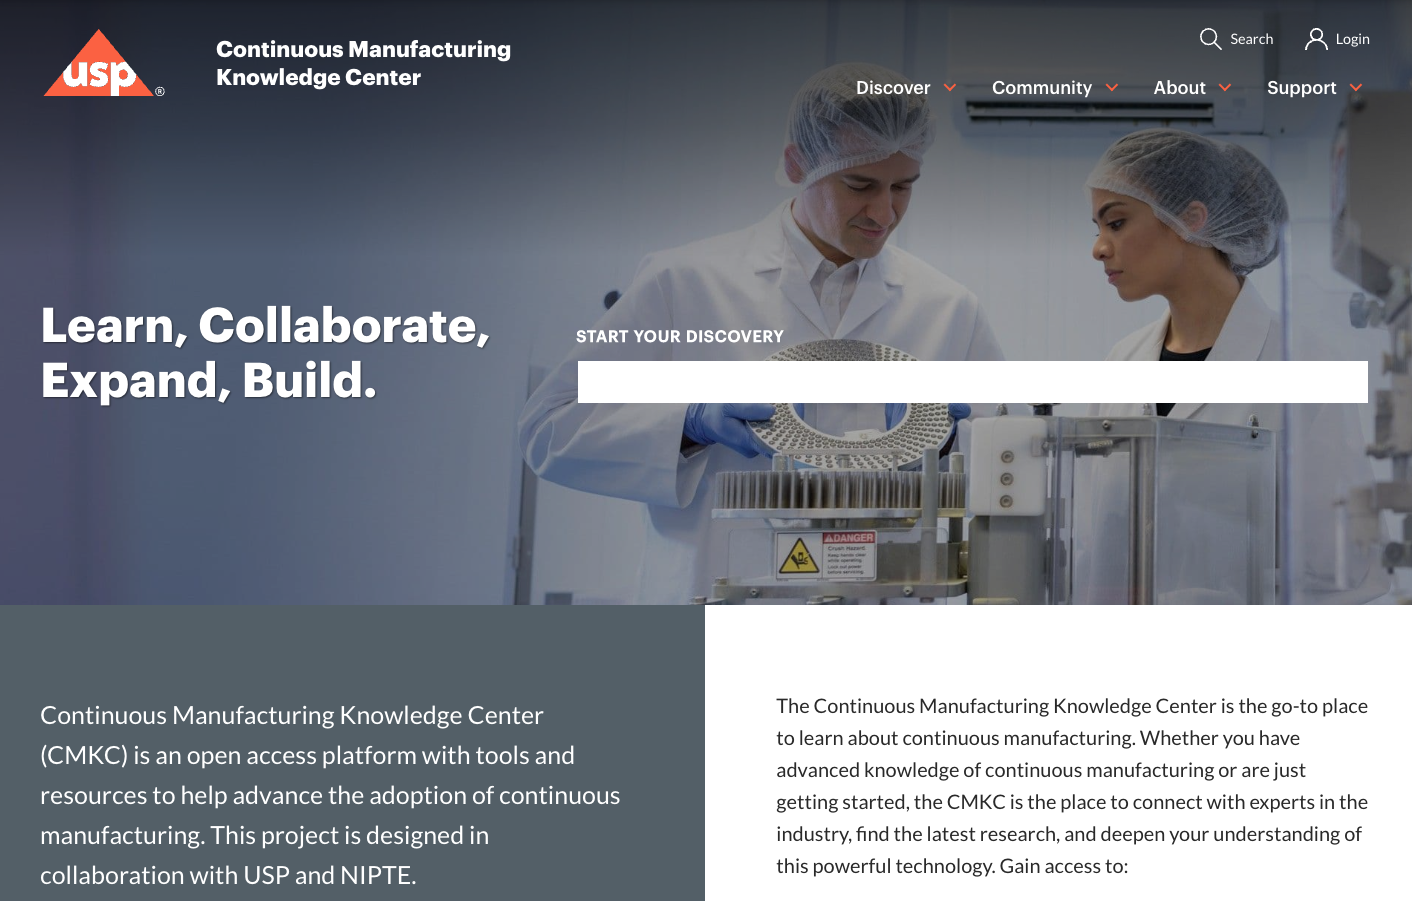 Continuous Manufacturing Knowledge Center (CMKC)